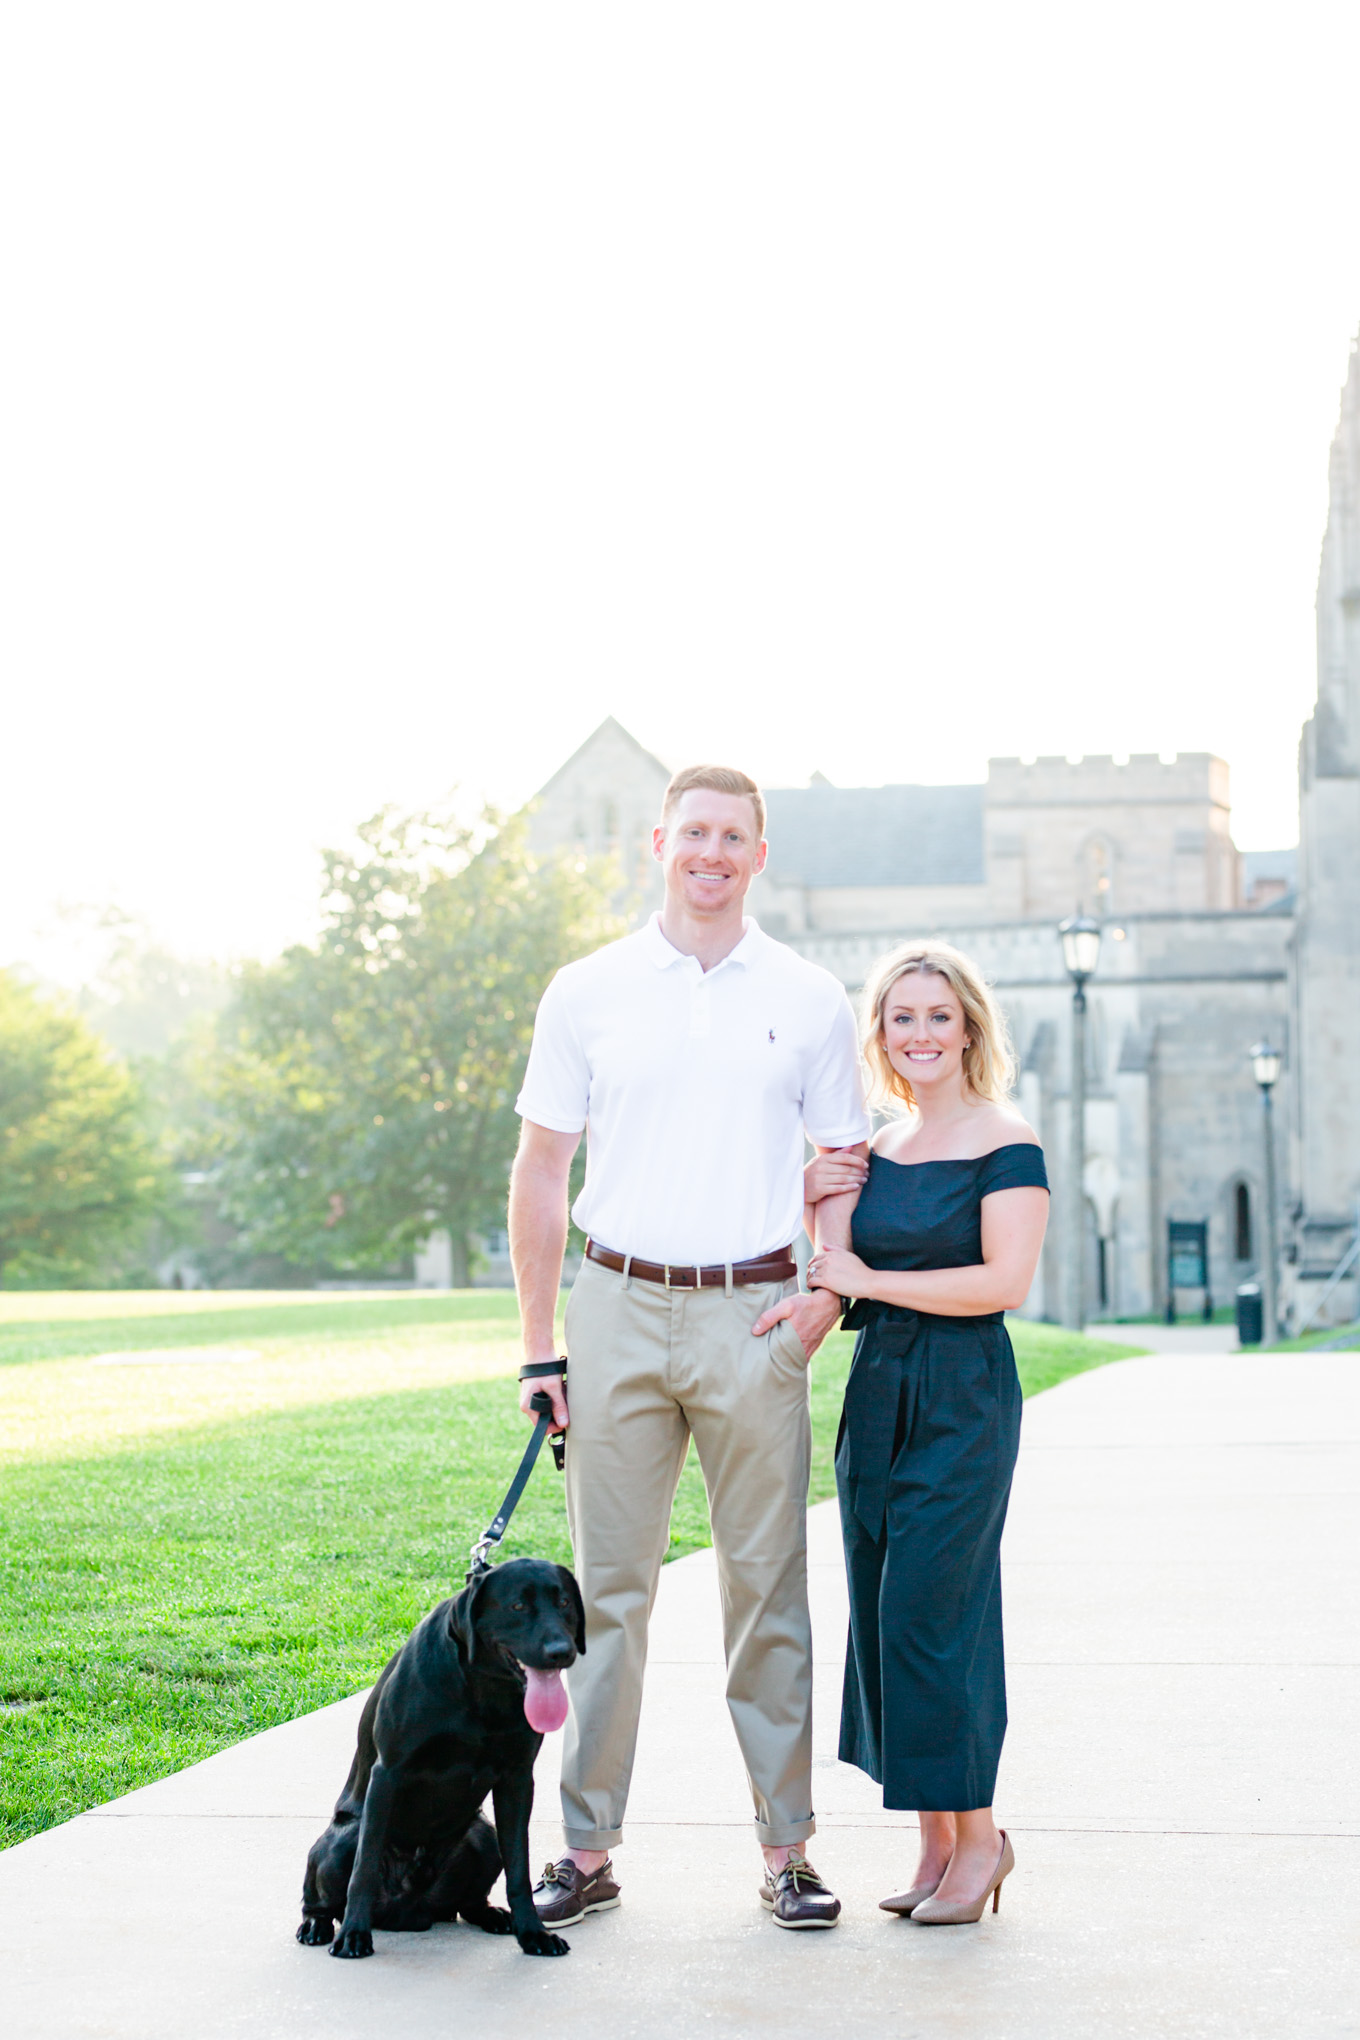 include dogs at photo shoots, how to include dogs at photo shotos, tips for including dogs at photo shoots, Rachel E.H. Photography, D.C. wedding photographer, DC wedding photographer, tips and tricks, dog tips and tricks, photography tips and tricks, engagement photos, natural light photography tips, black lab, National Cathedral